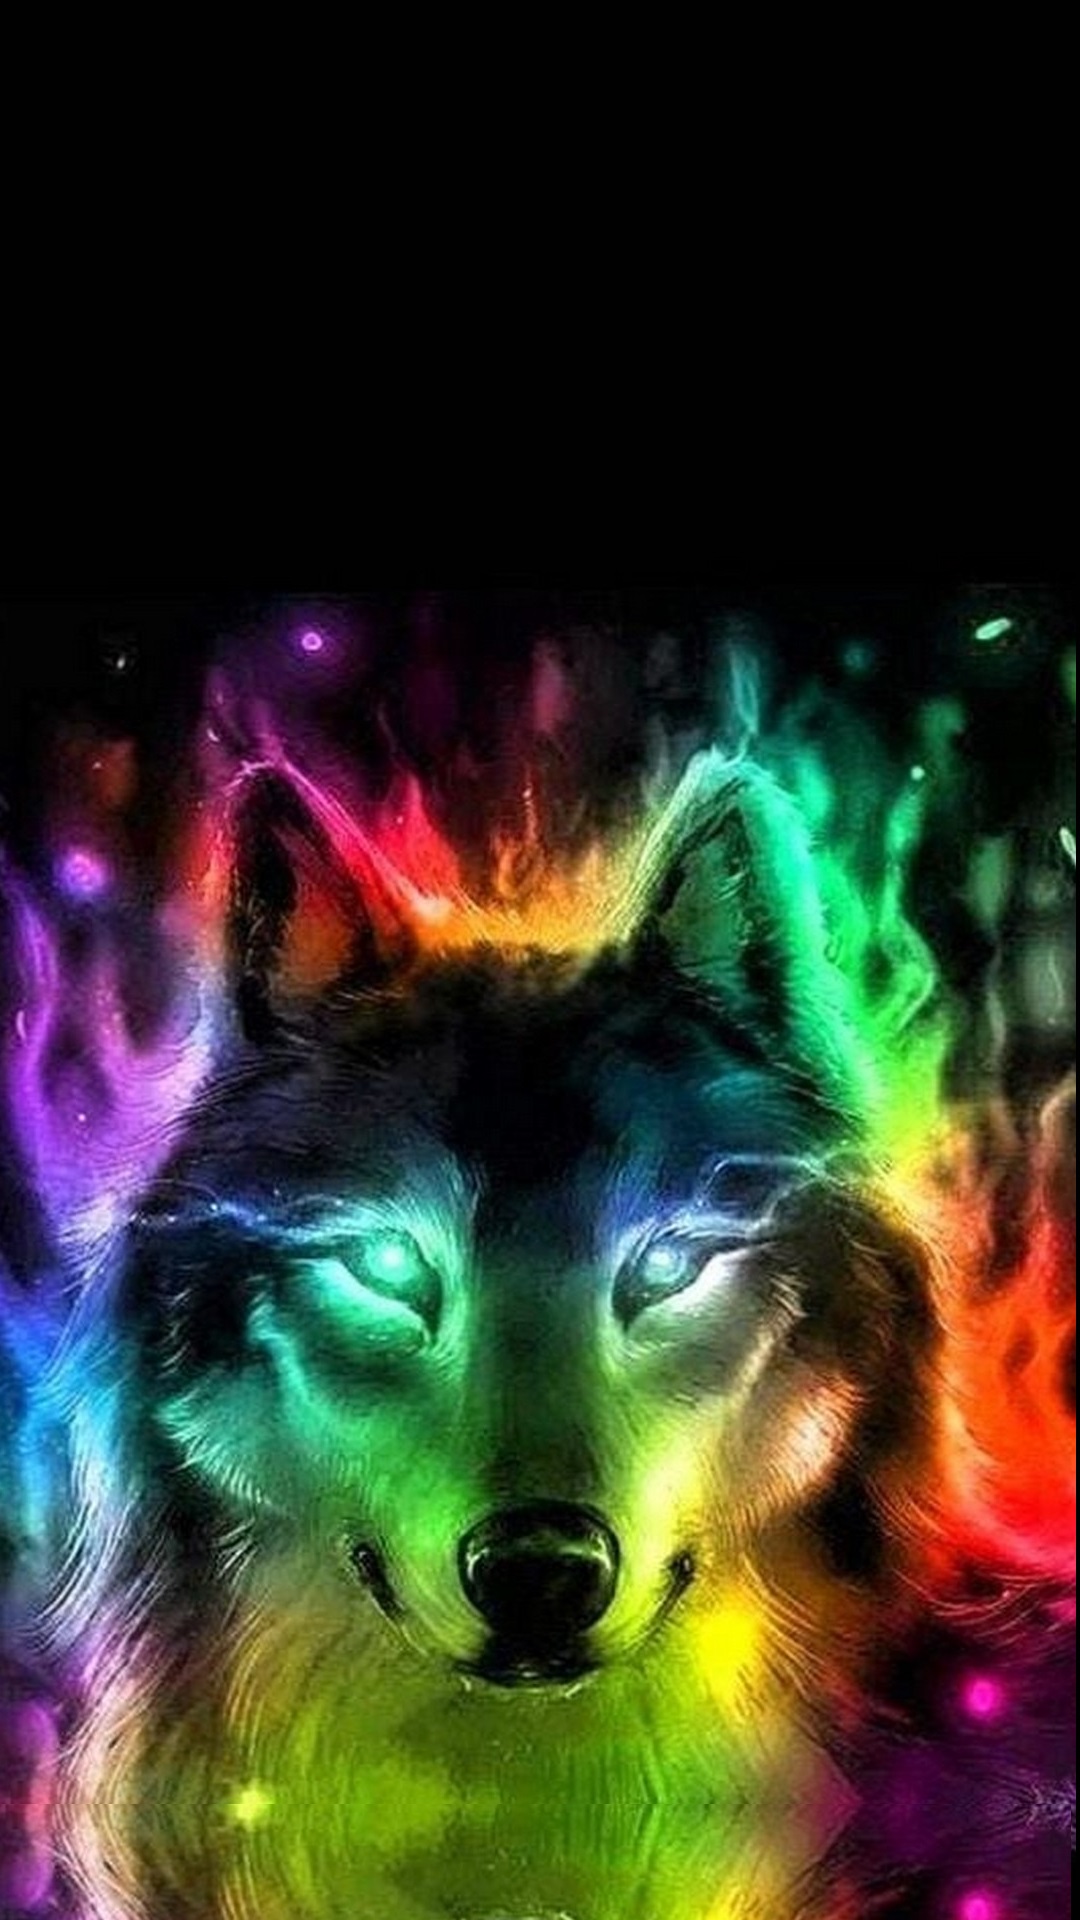 Cool Wolf Phone 8 Wallpaper with high-resolution 1080x1920 pixel. Download all Mobile Wallpapers and Use them as wallpapers for your iPhone, Tablet, iPad, Android and other mobile devices